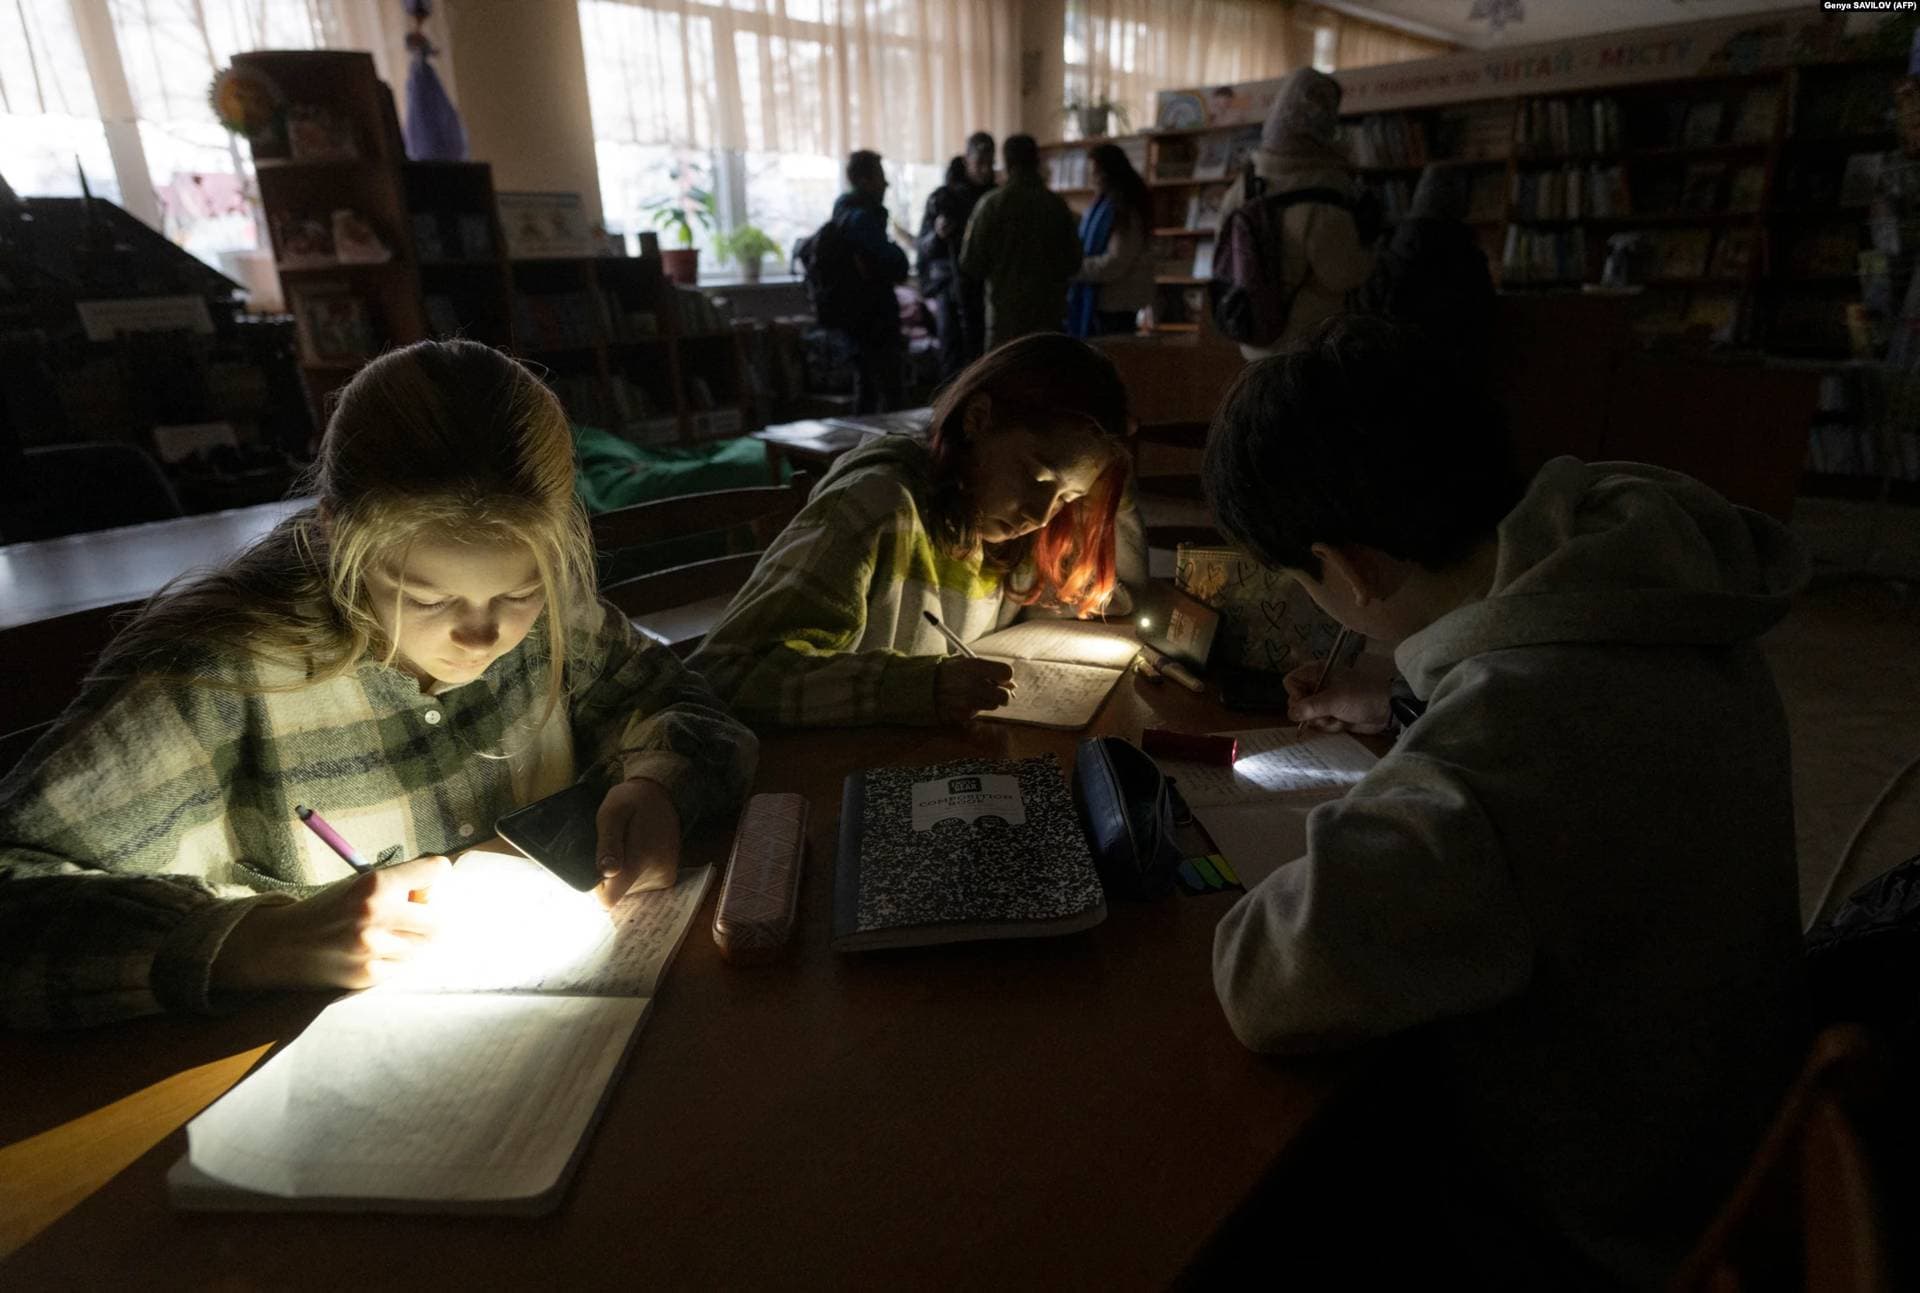 Children use flashlights on their mobile phones during a power outage at a meeting of their literature club in Irpin's public library